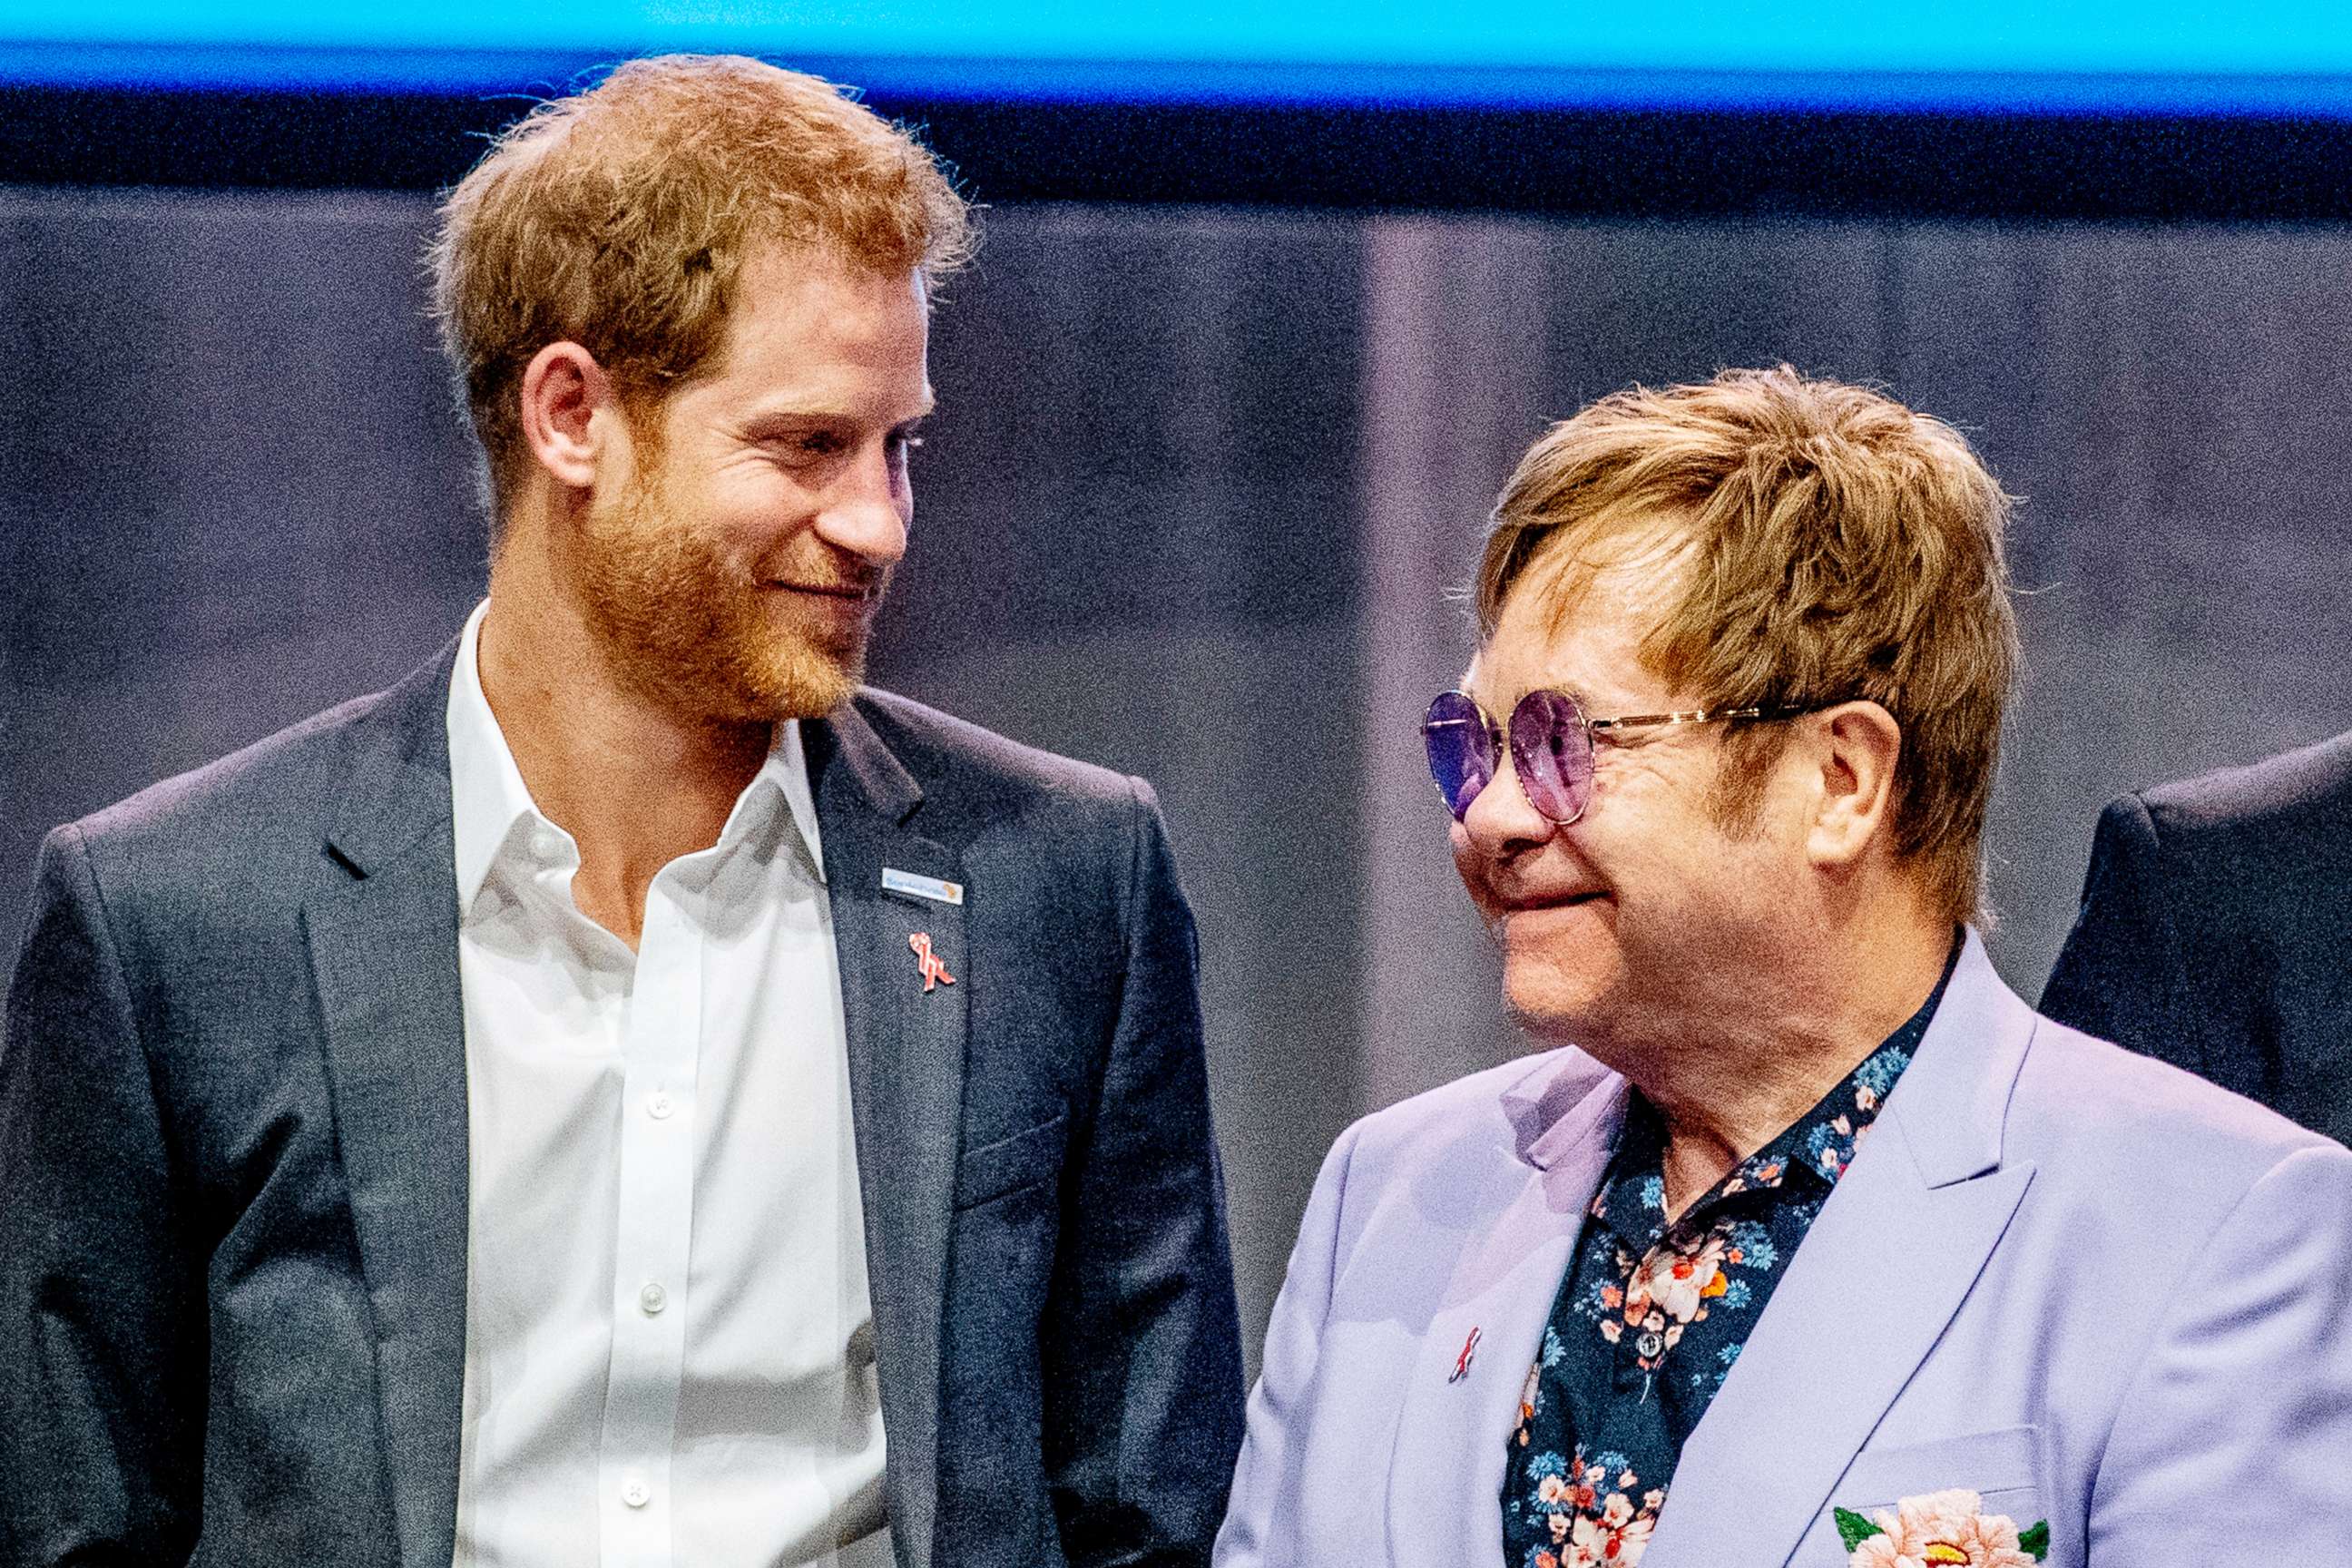 PHOTO: Prince Harry and Elton John during a session at the AIDS2018 conference about the work of the Elton John Aids Foundation 22nd International AIDS Conference, Amsterdam, July 24, 2018.